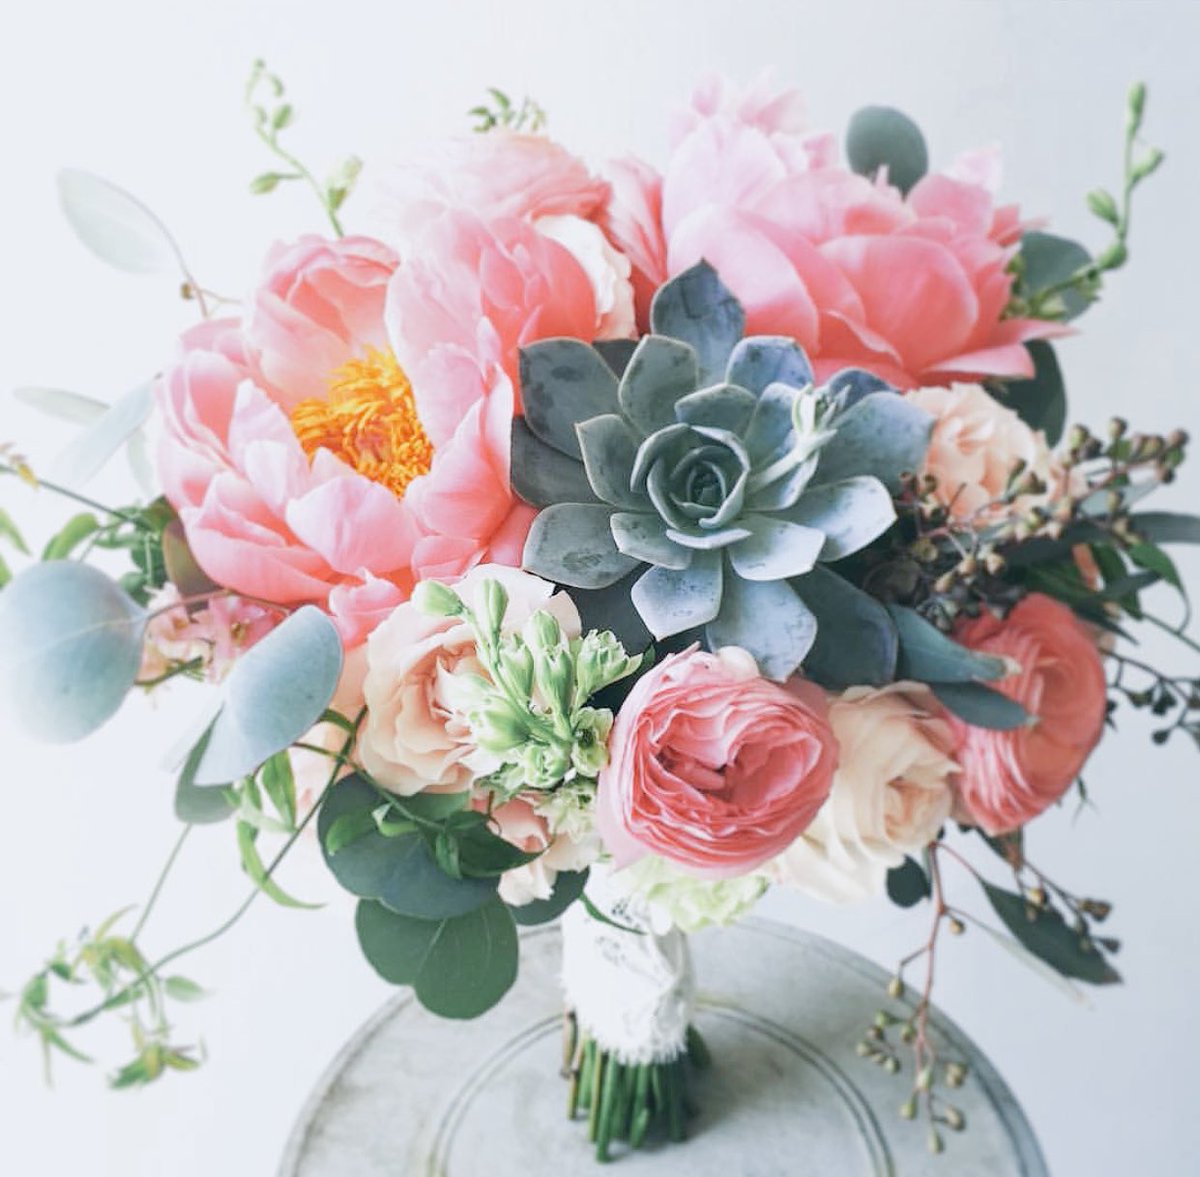 Oh my word! Just adoring these #succulent #blooms. #wedding #bouquetstyle